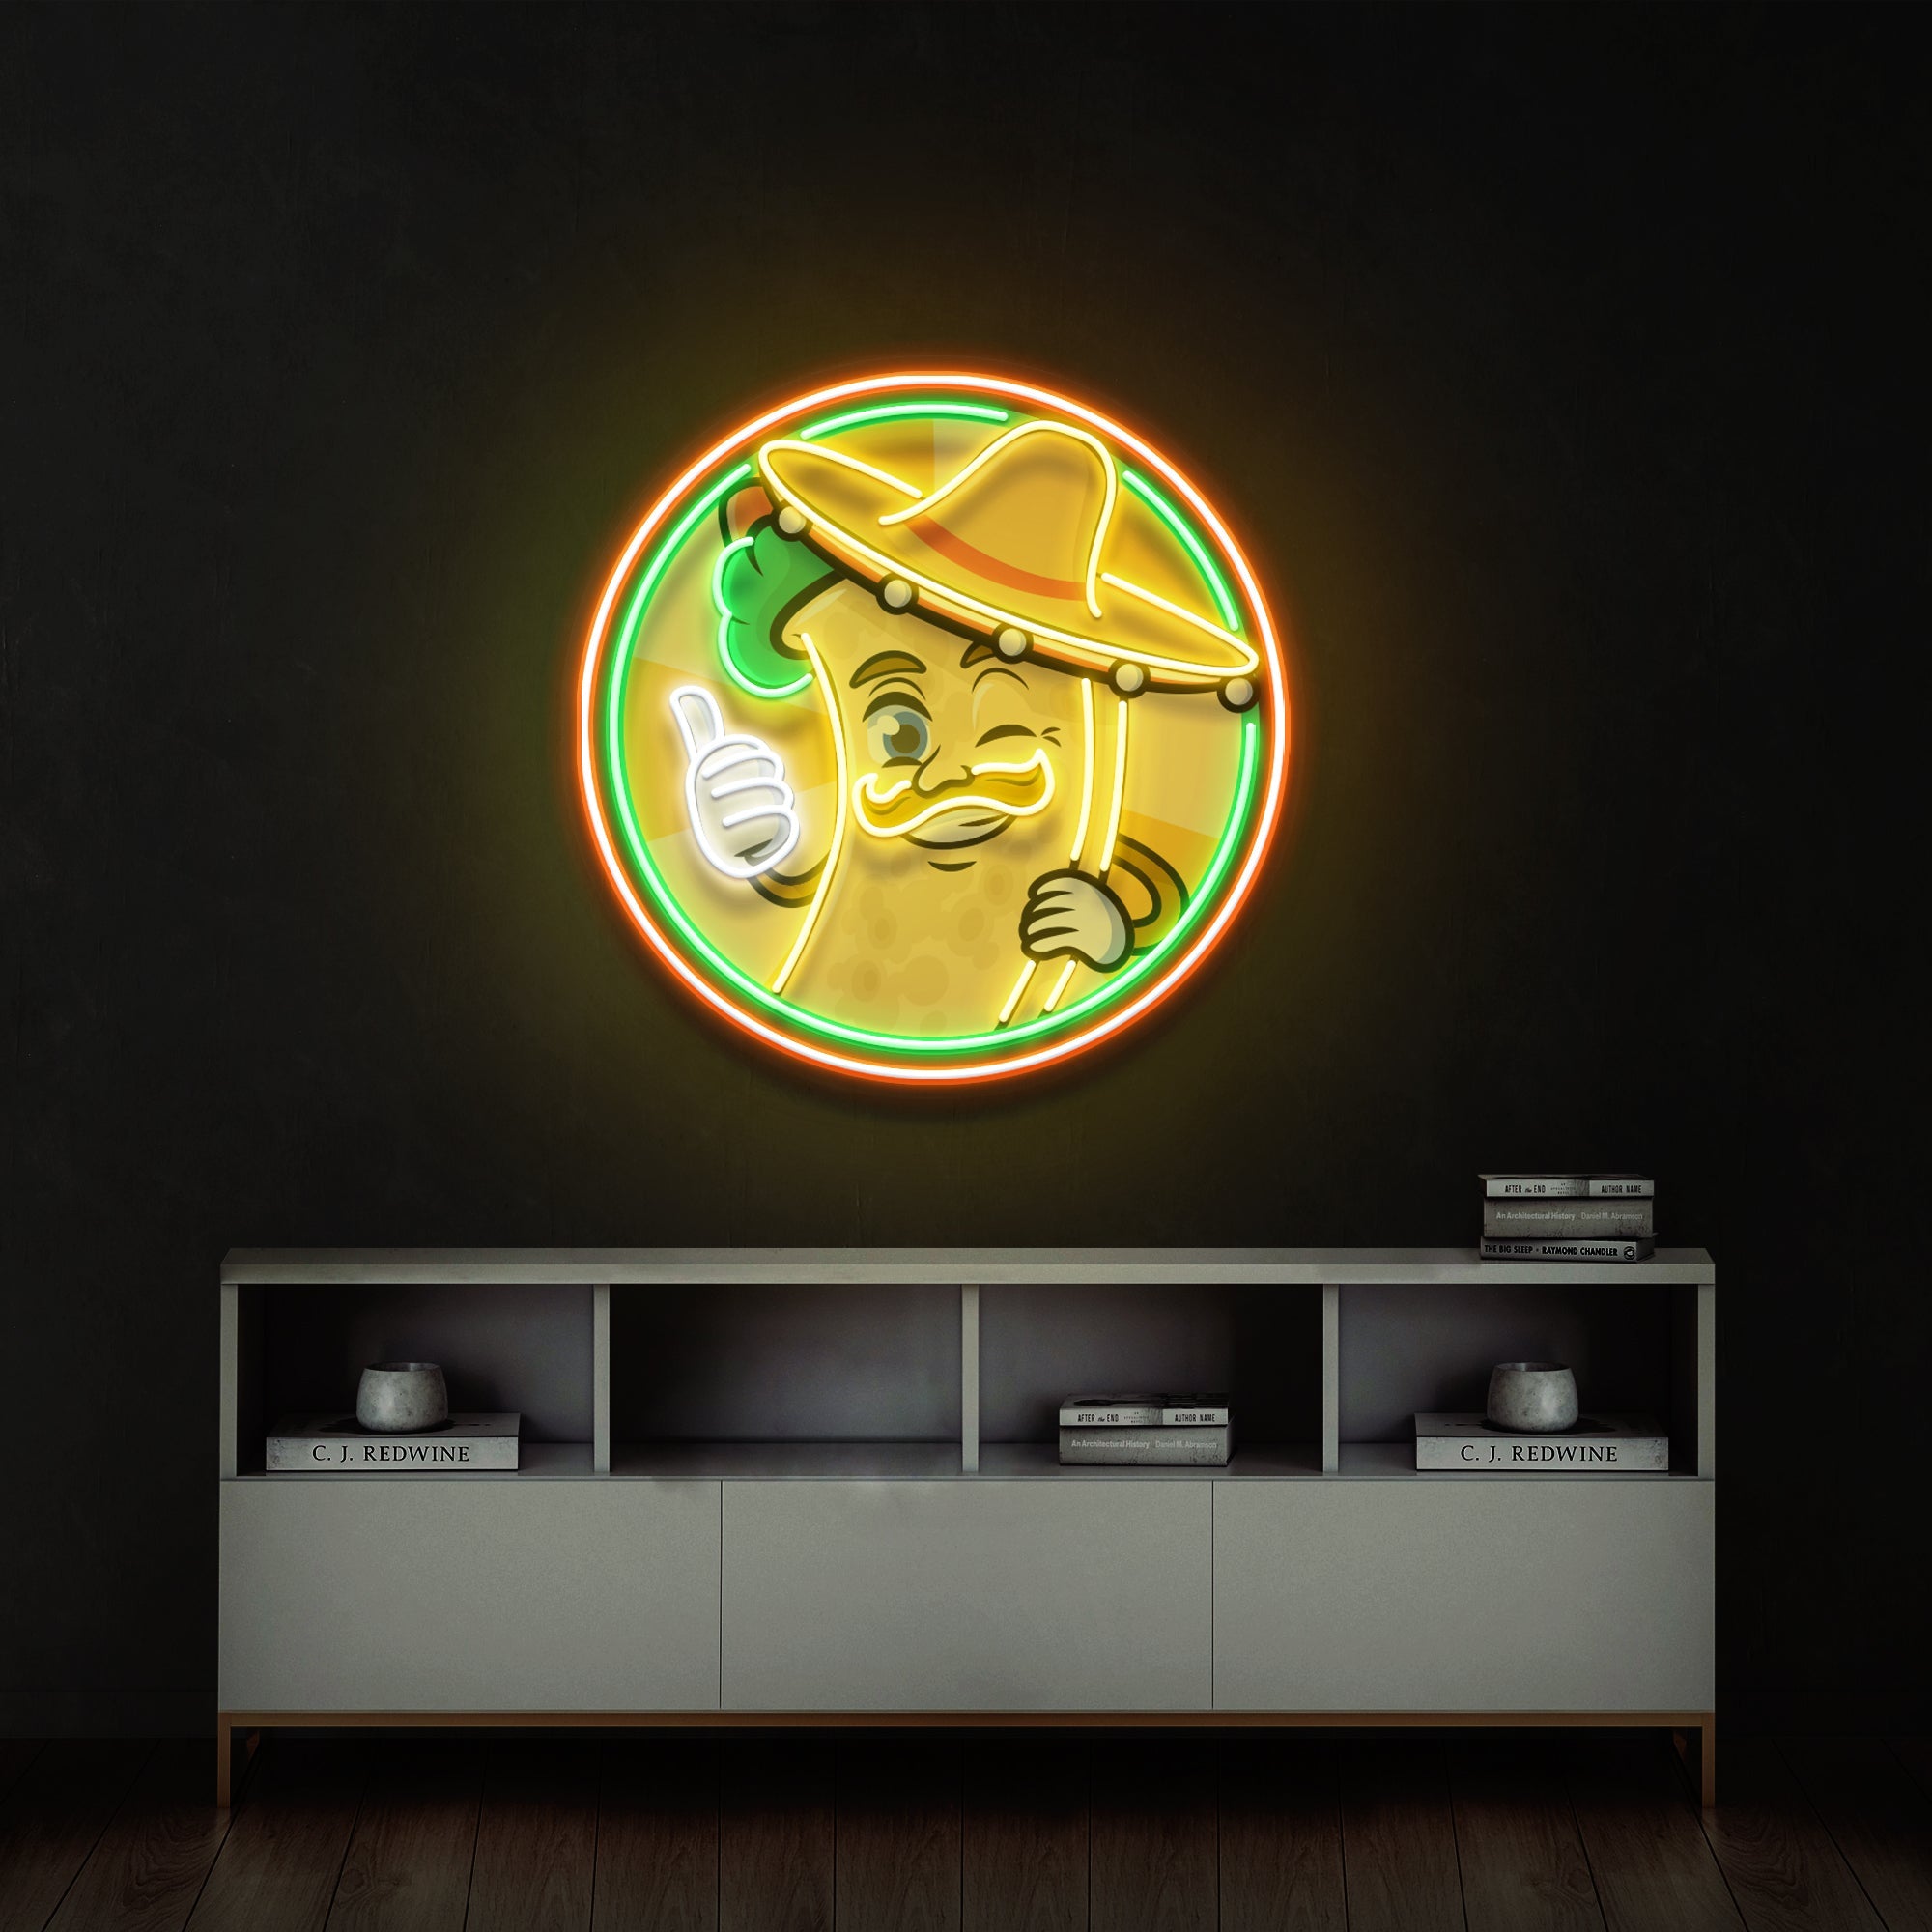 Mexican Burrito Thumbs Up Artwork Led Neon Sign Light - Neonbir